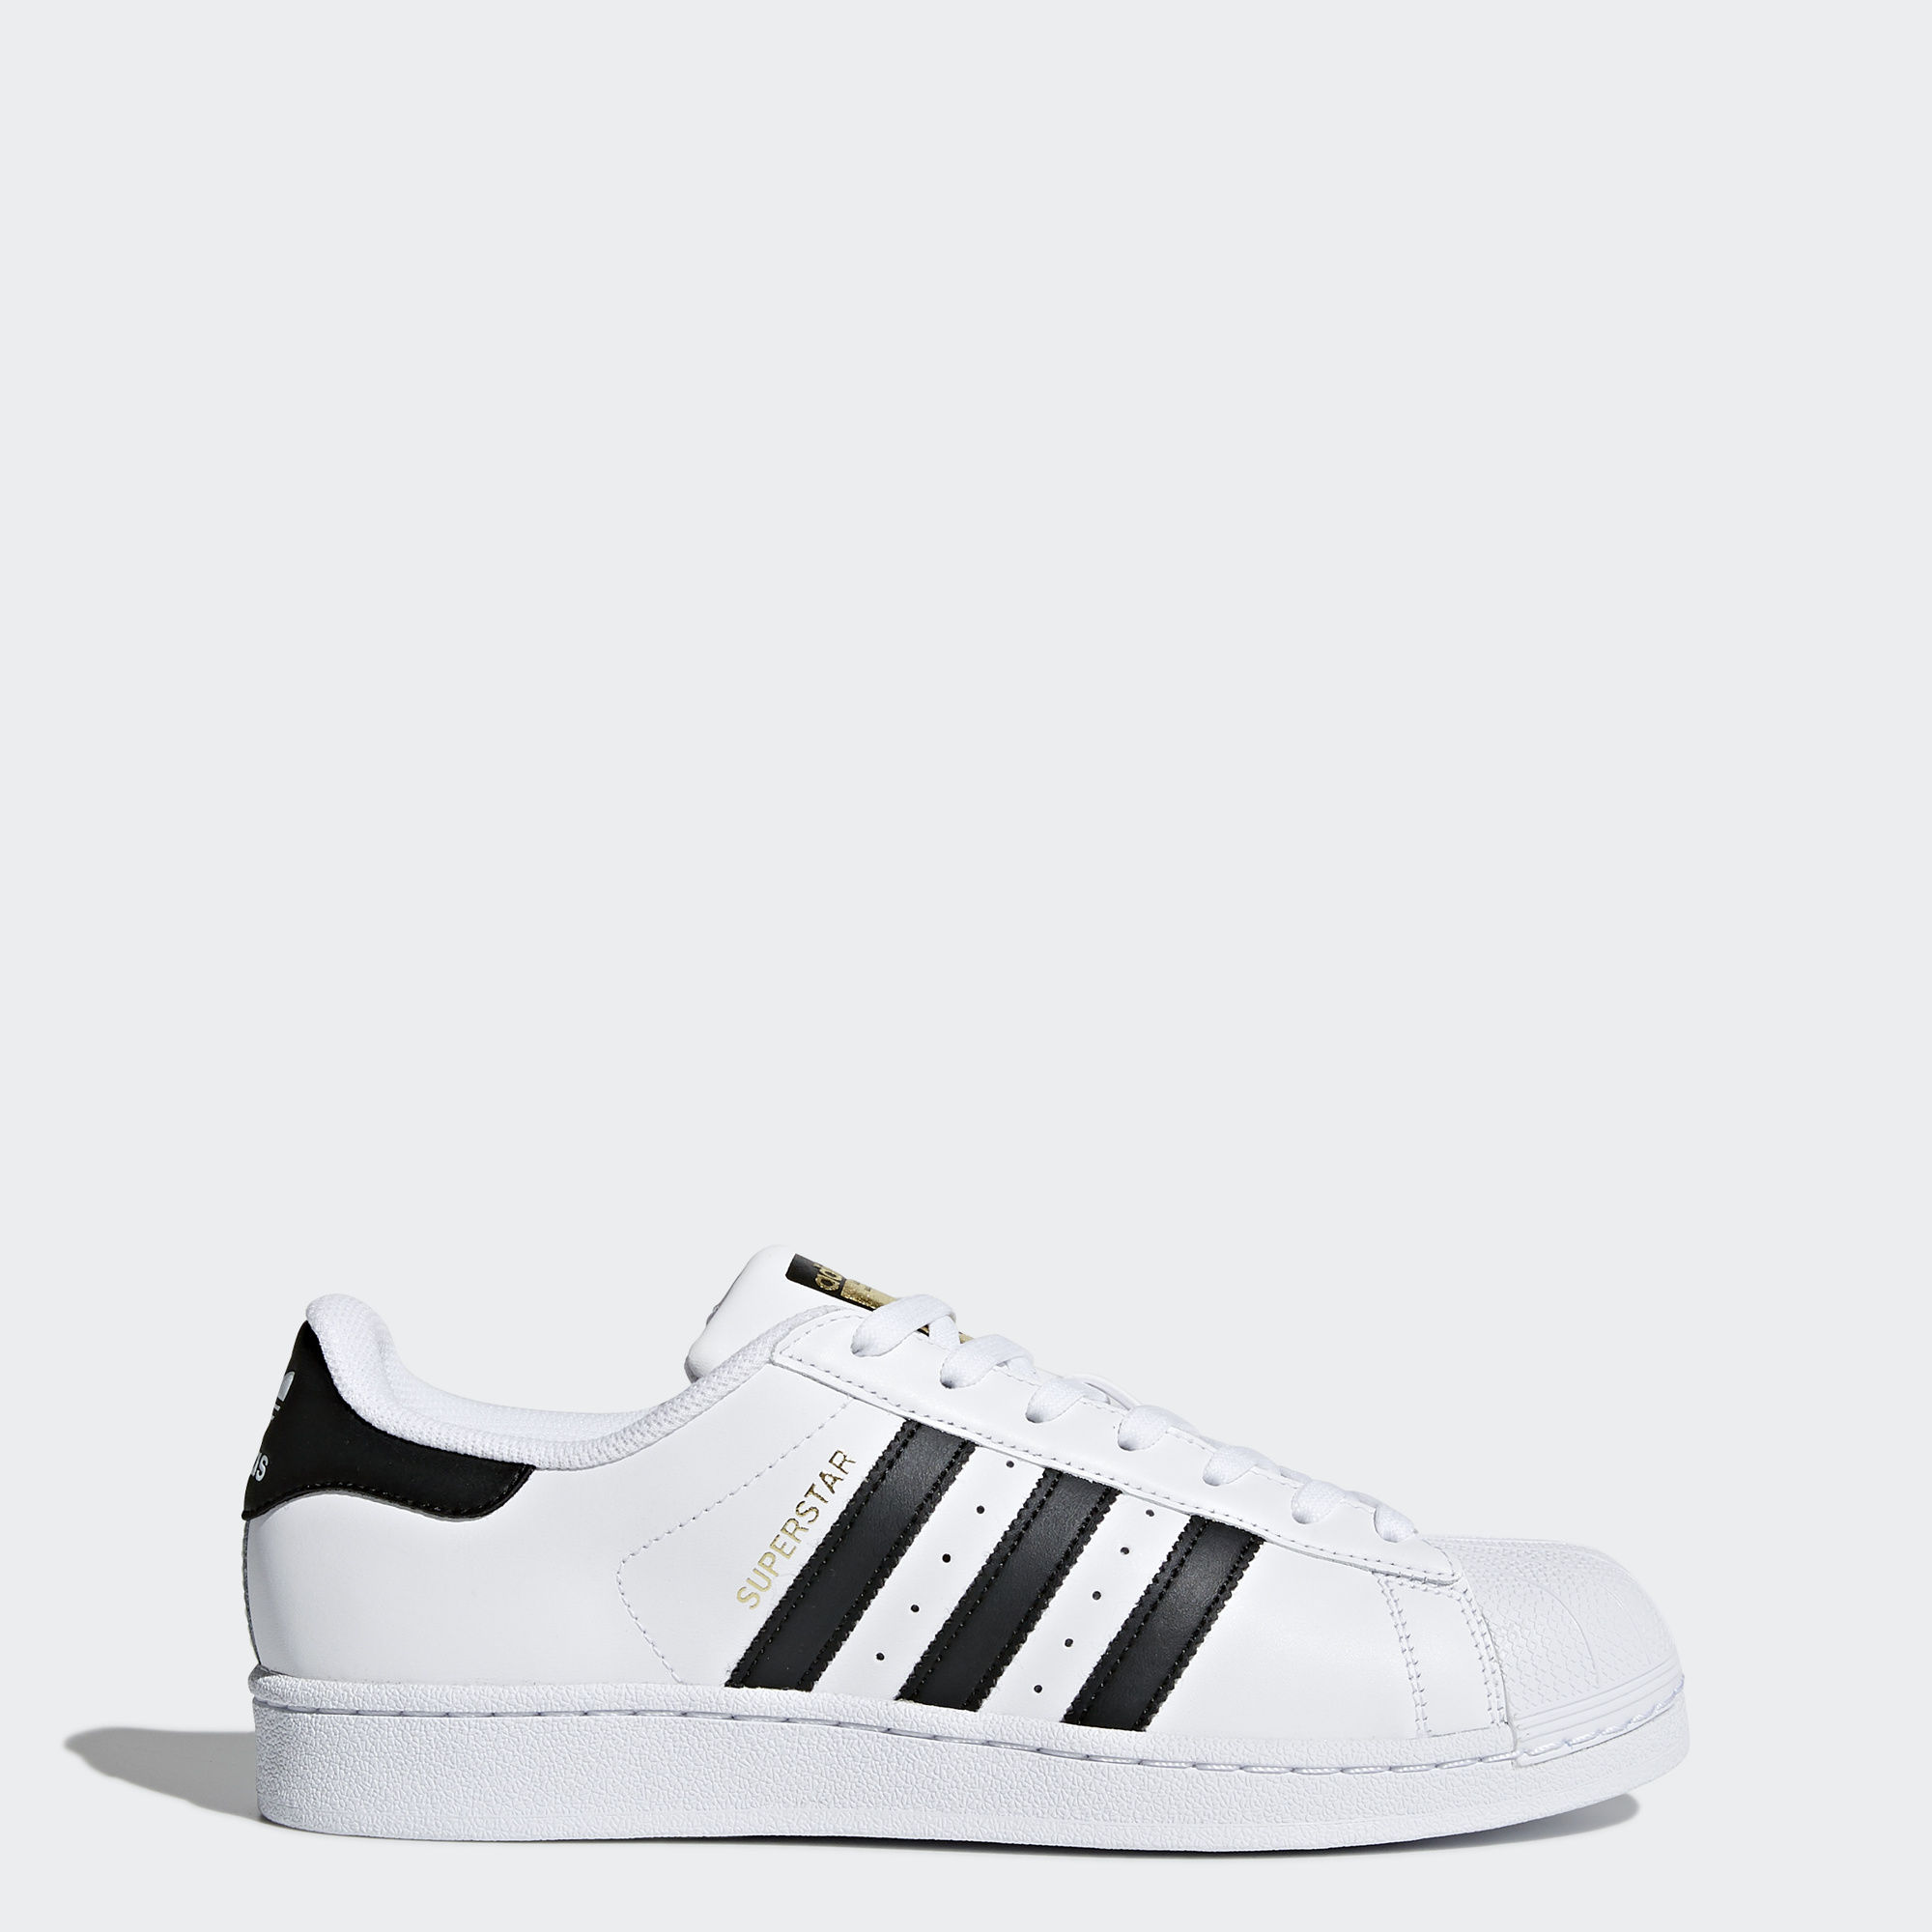 adidas chaussures images